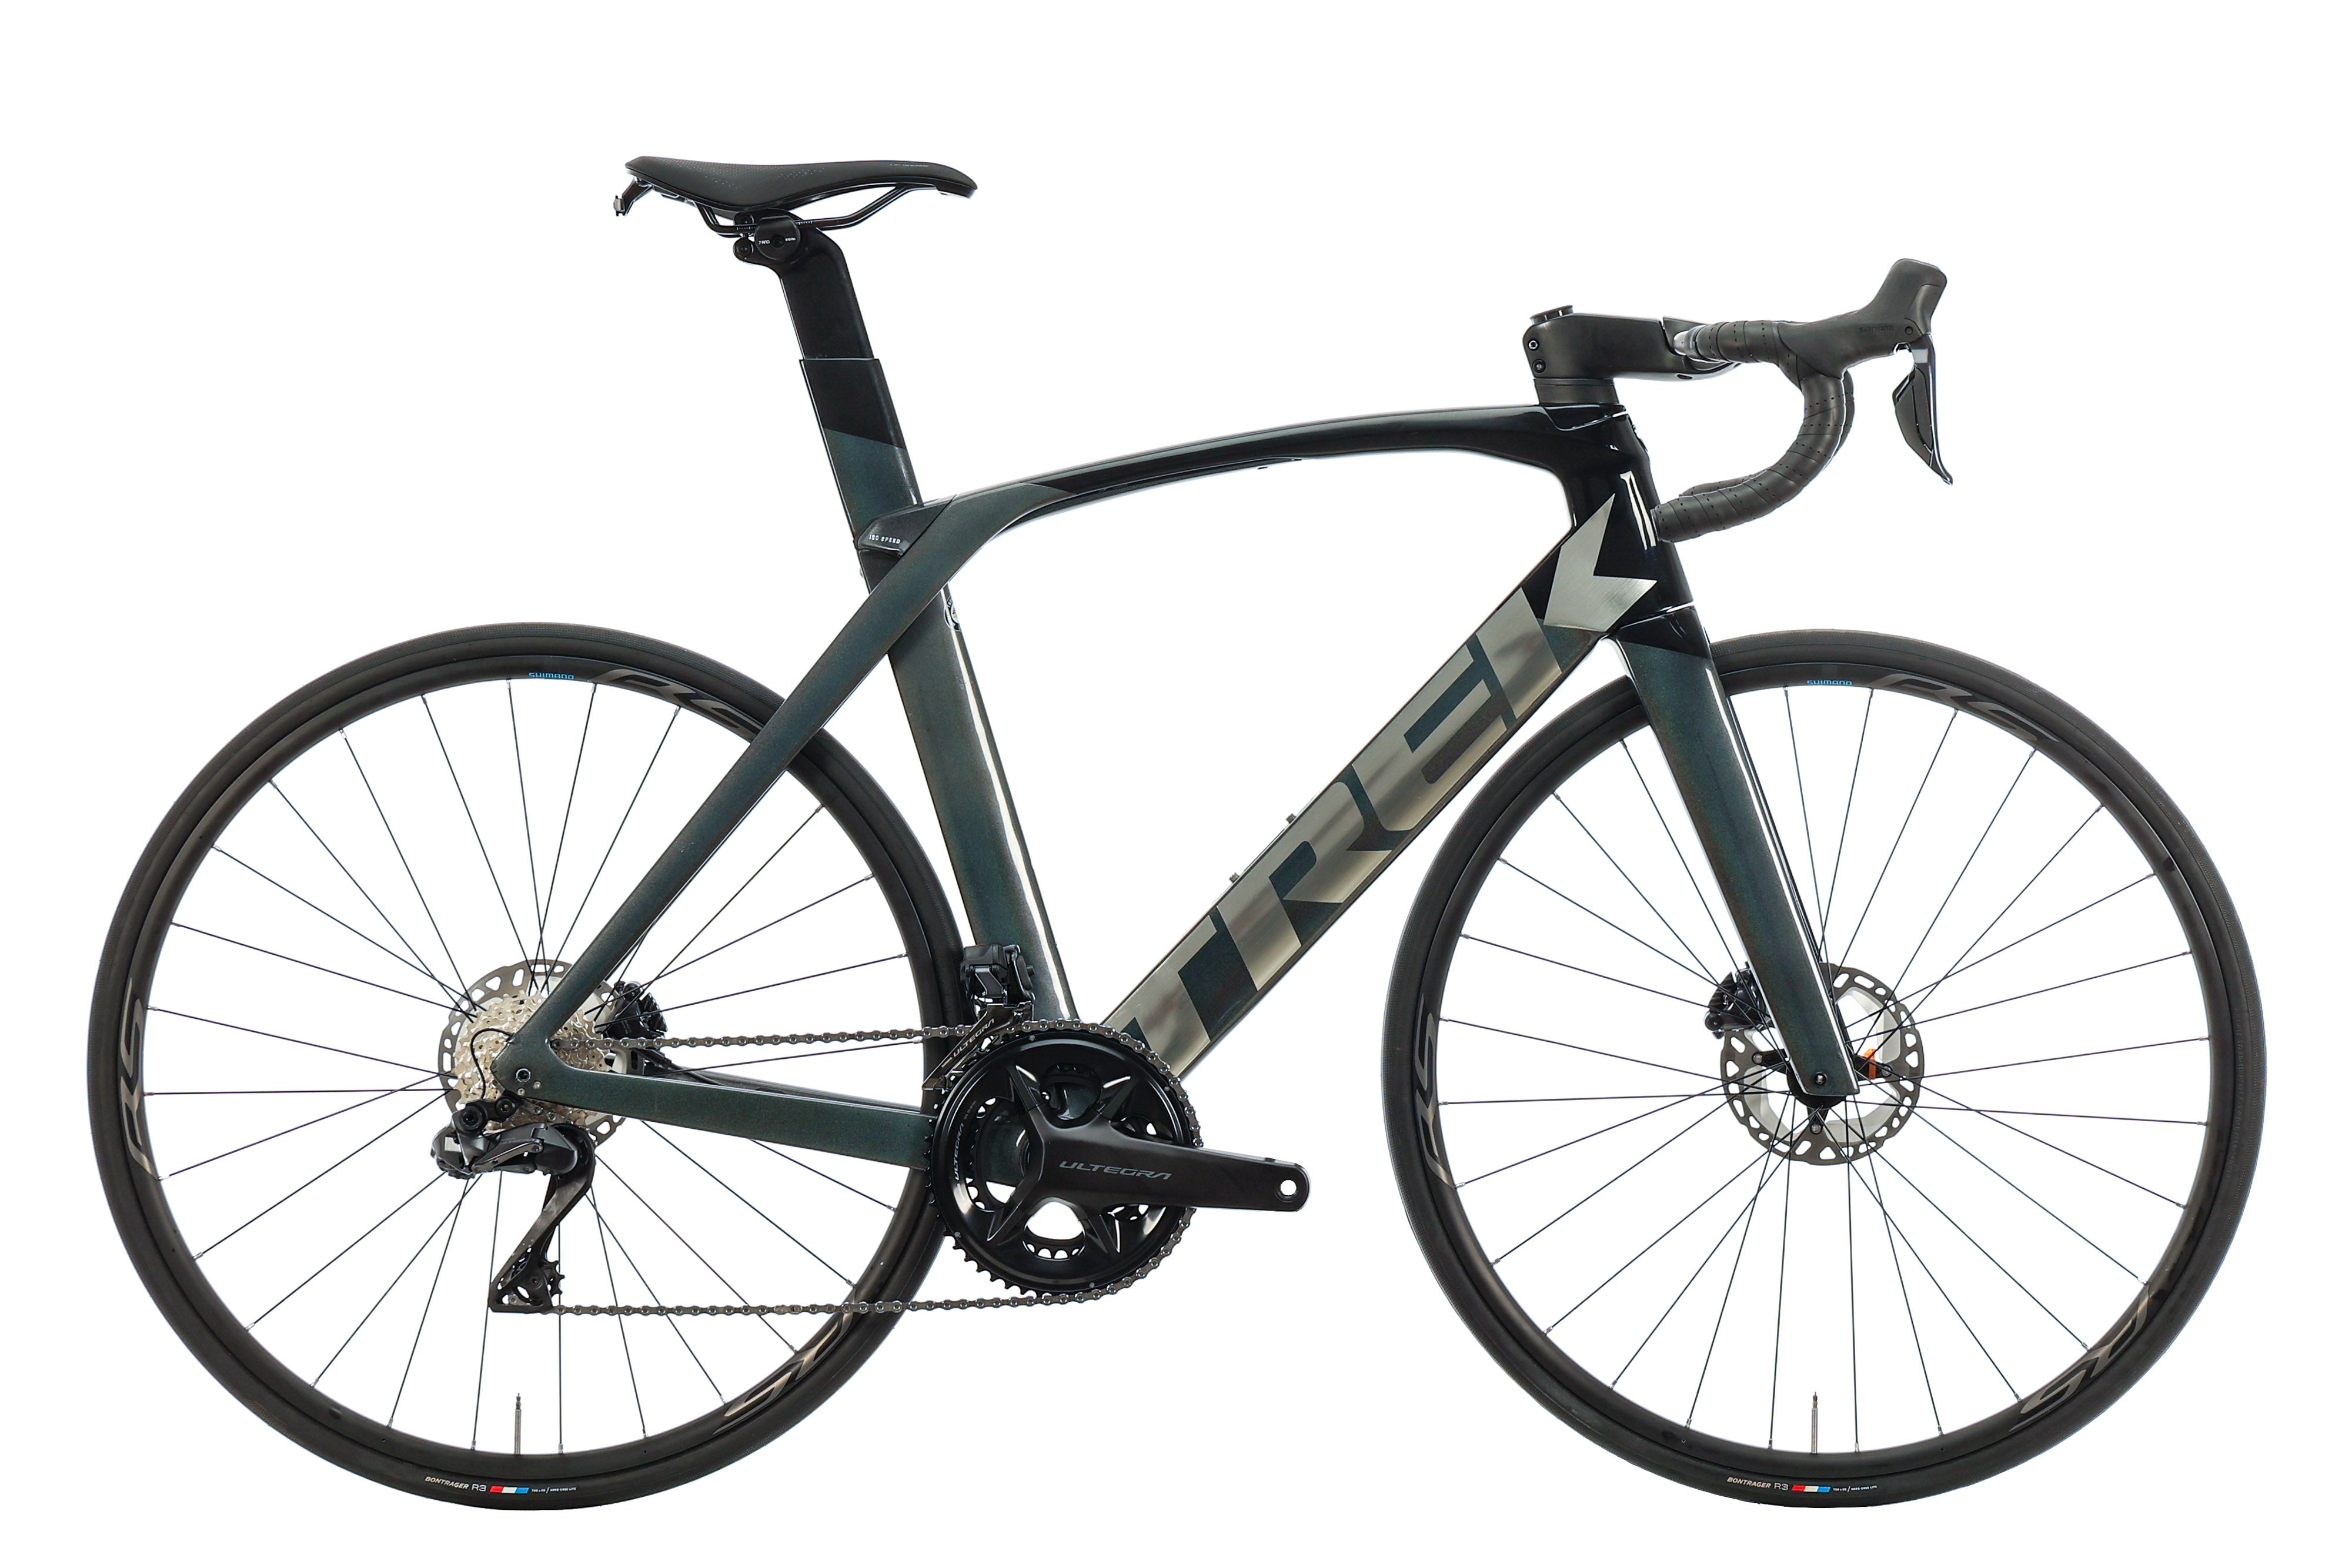 New and Used Road Bikes For Sale Aero, TT, Endurance and More TPC